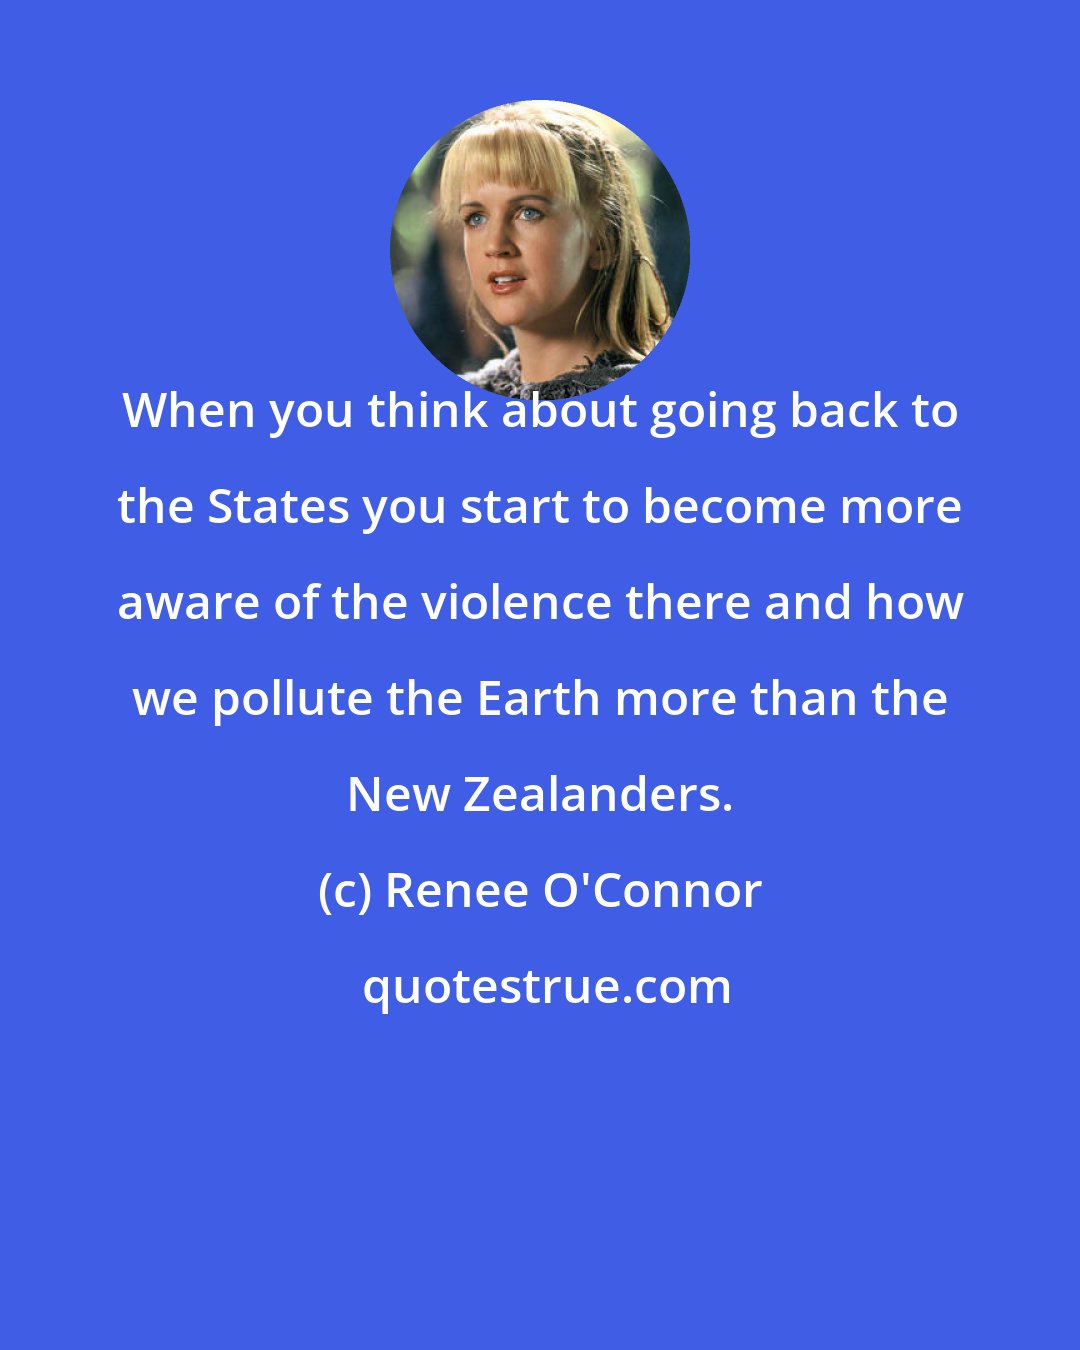 Renee O'Connor: When you think about going back to the States you start to become more aware of the violence there and how we pollute the Earth more than the New Zealanders.